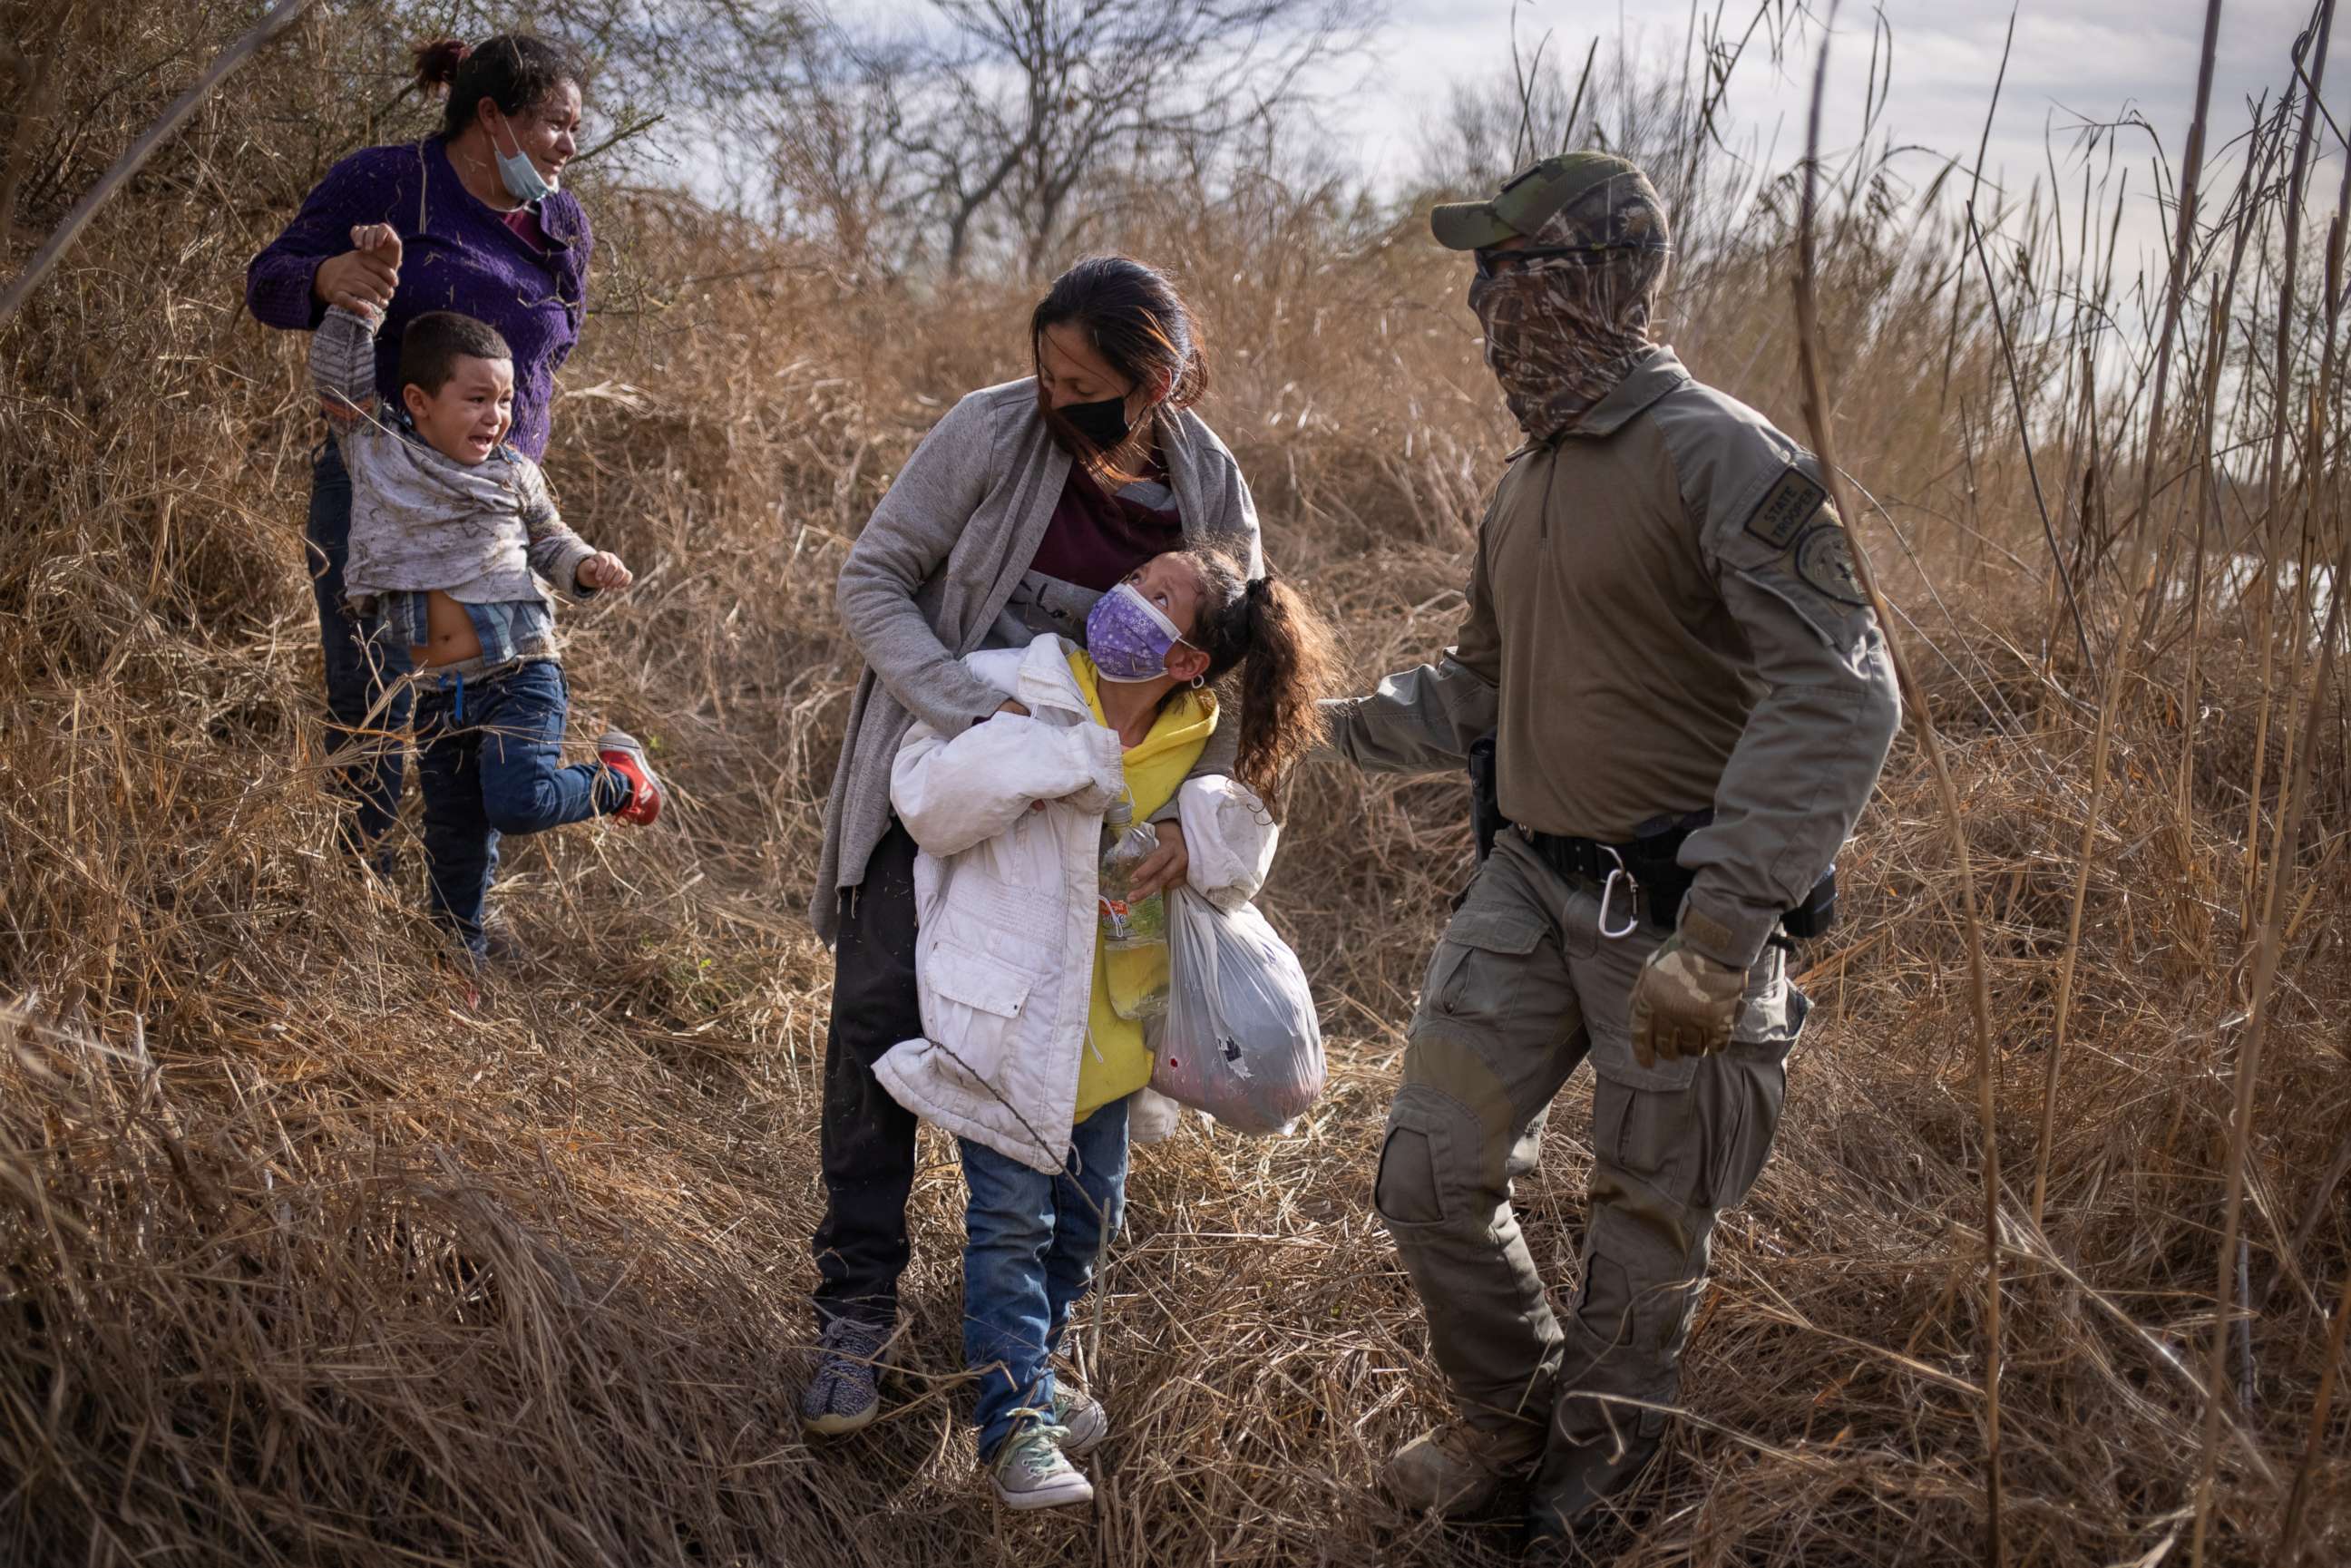 PHOTO: A mother and child from El Salvador and a mother and child from Honduras are escorted out of the brush by a Texas State Trooper after crossing the Rio Grande river into the United States from Mexico on a raft in Penitas, Texas, March 9, 2021.